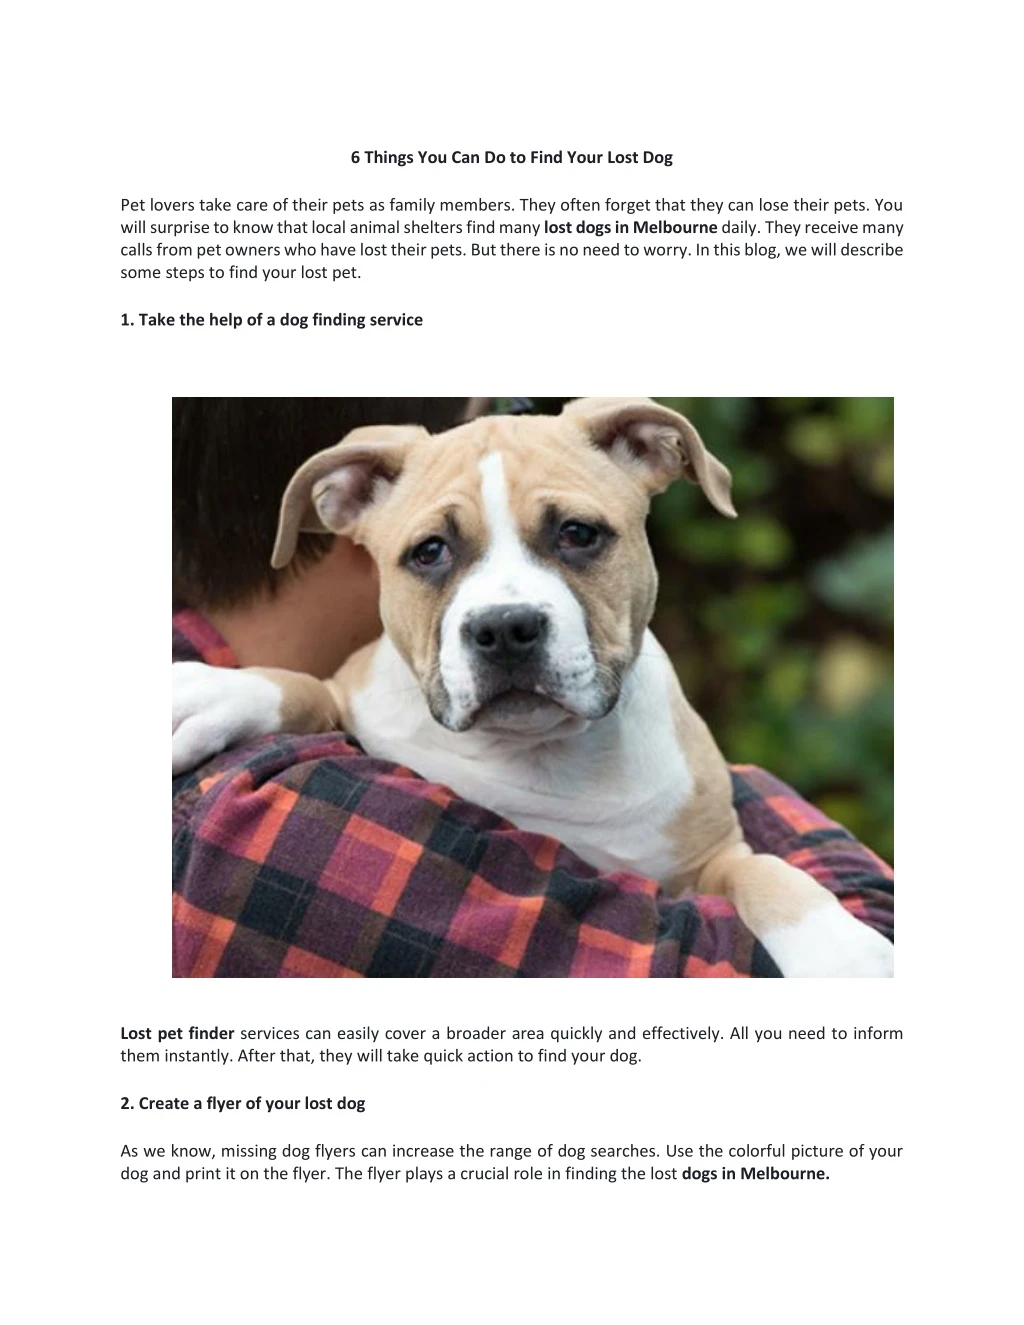 6 things you can do to find your lost dog